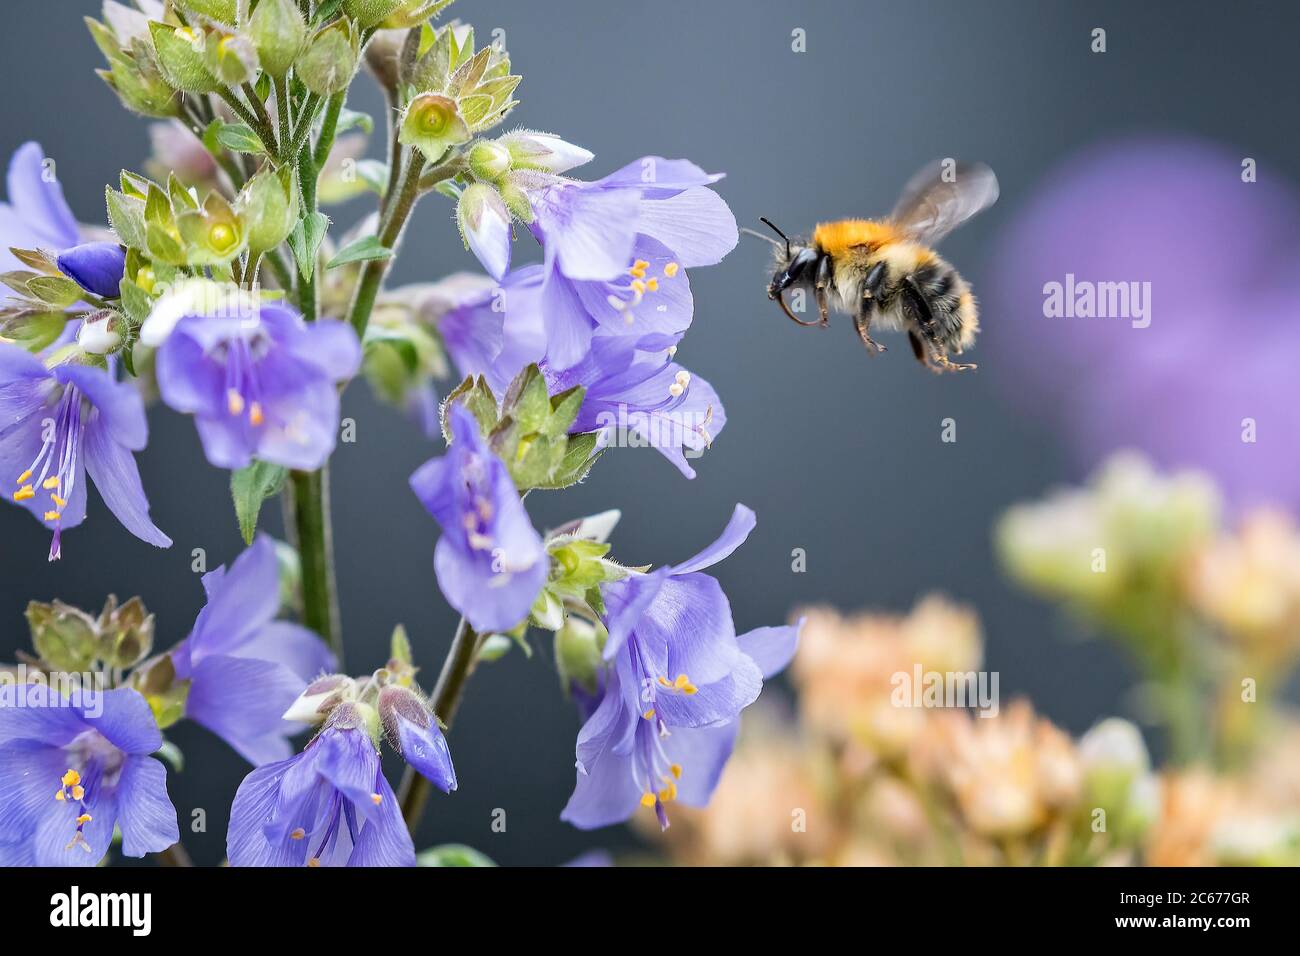 Airborne Bee approaching flower to pollinate Stock Photo